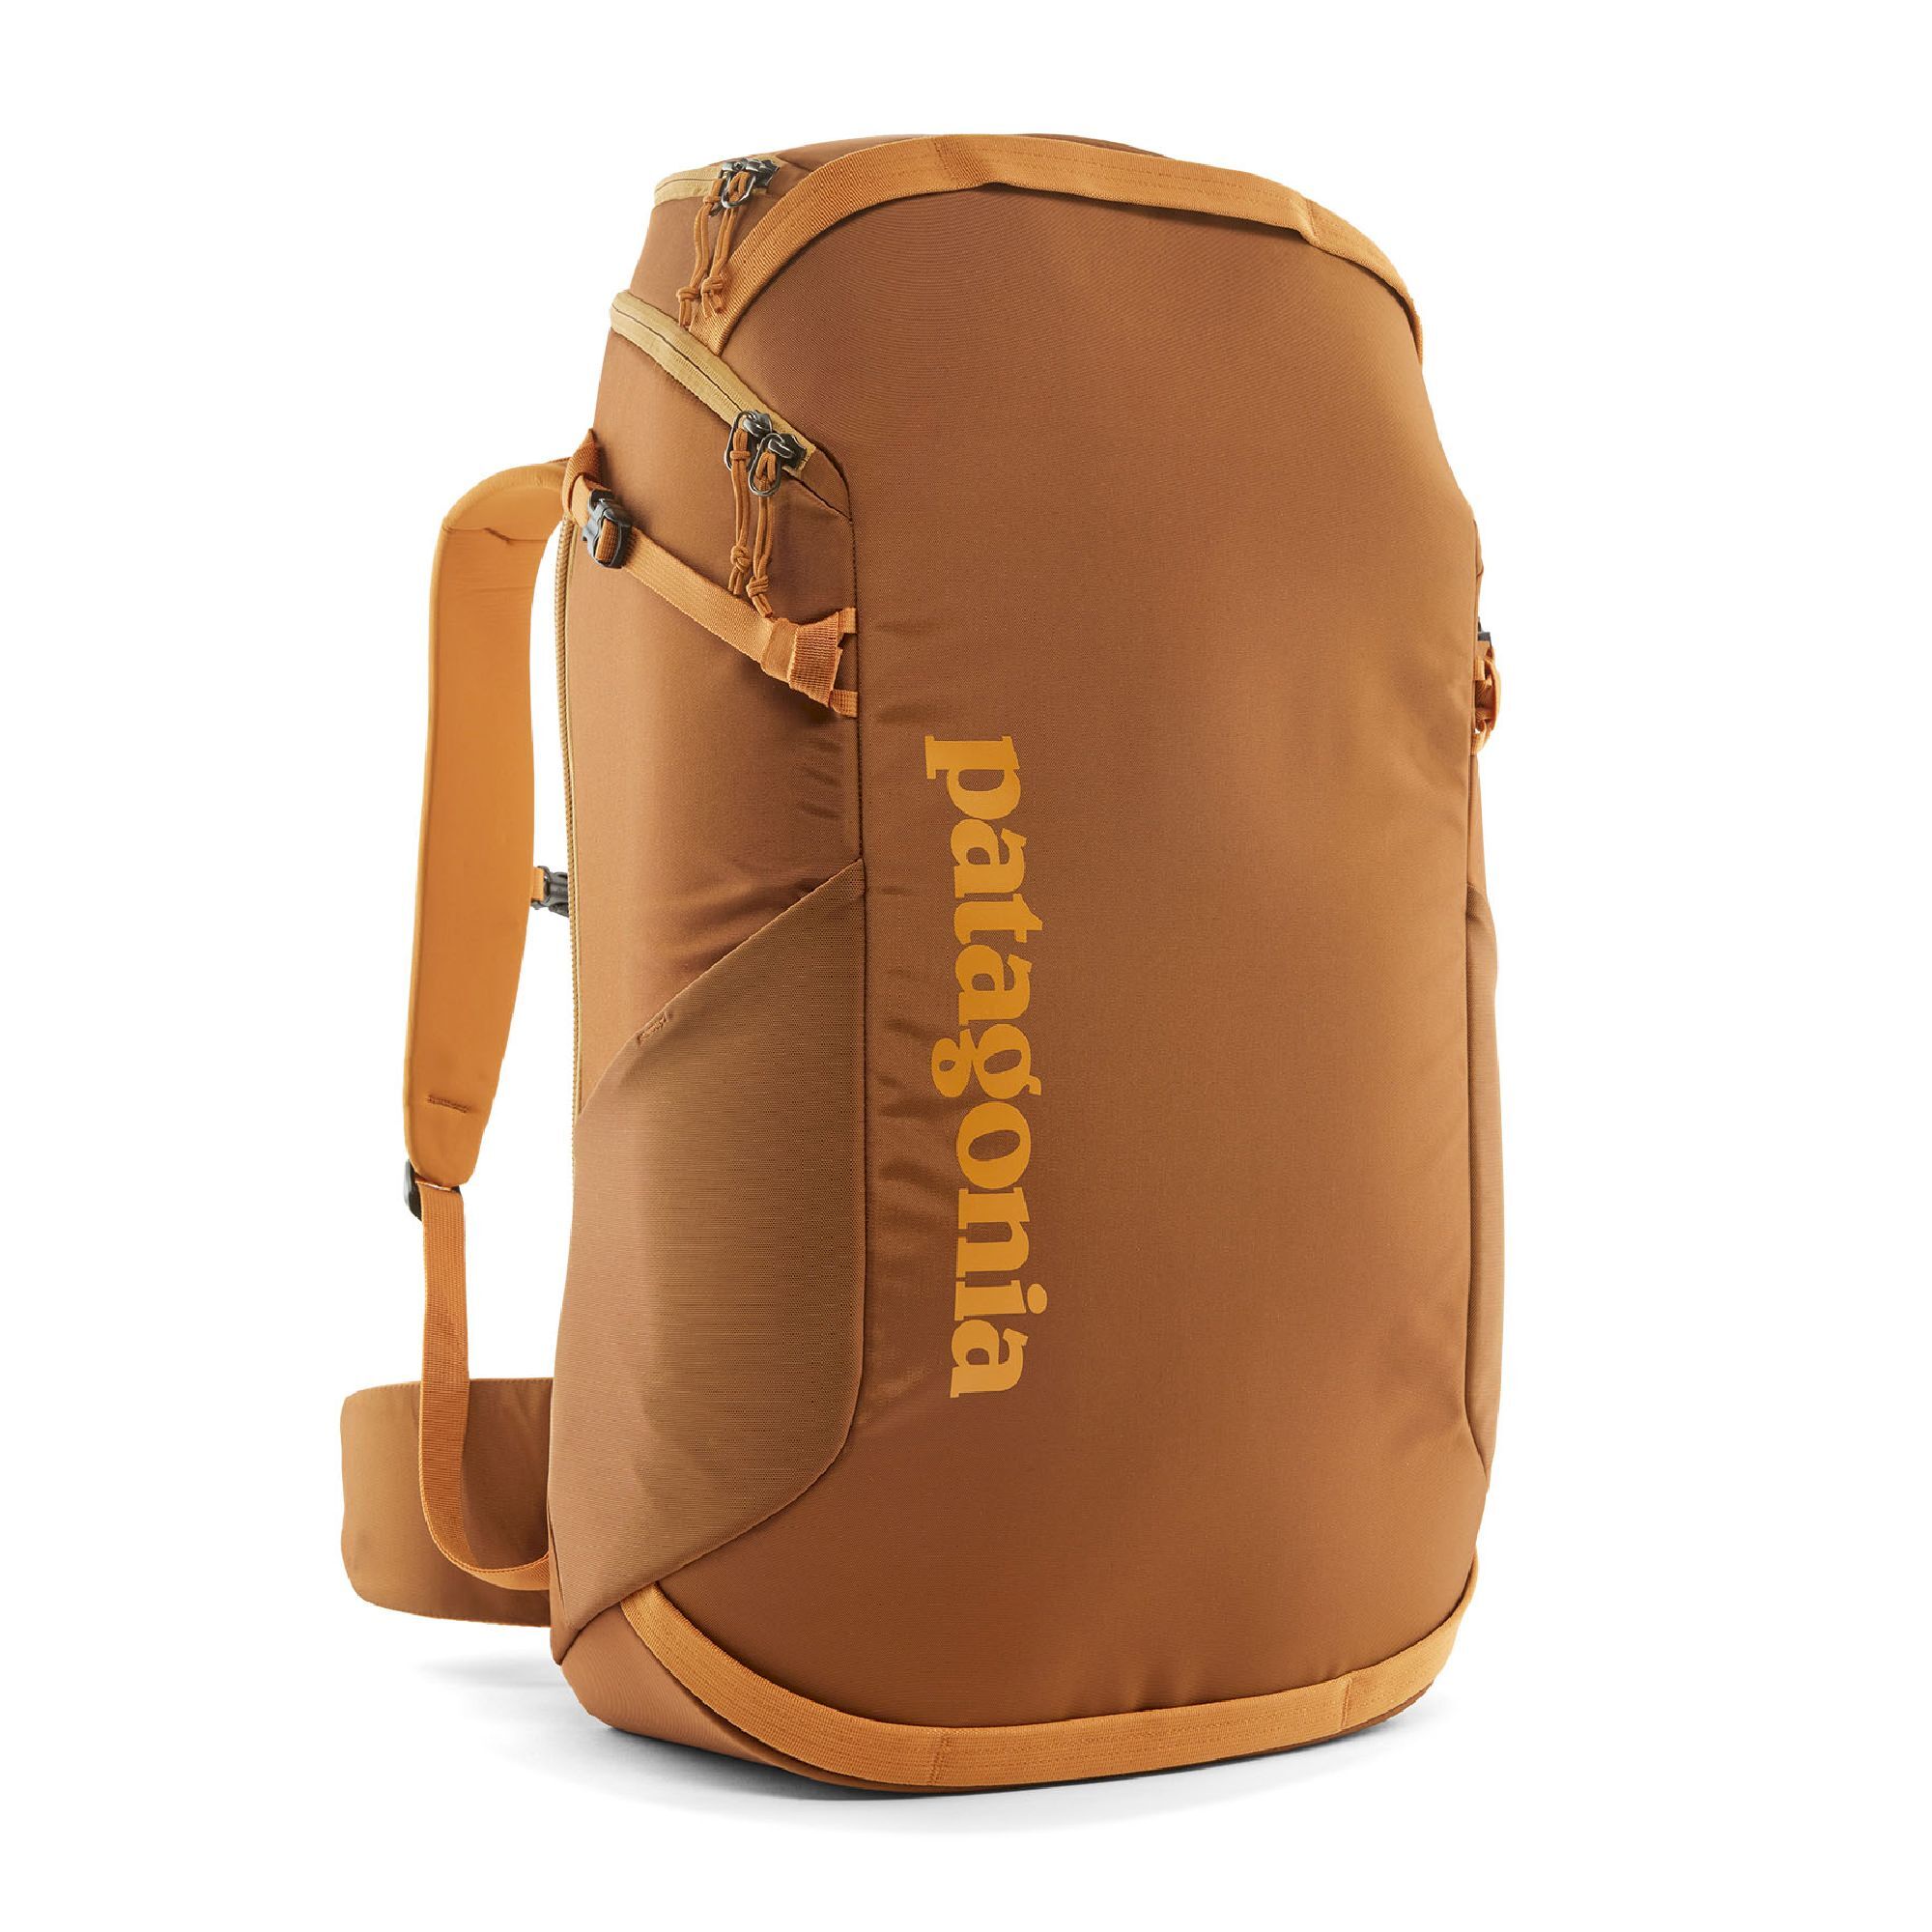 Patagonia Cragsmith 45L - Plecak wspinaczkowy | Hardloop